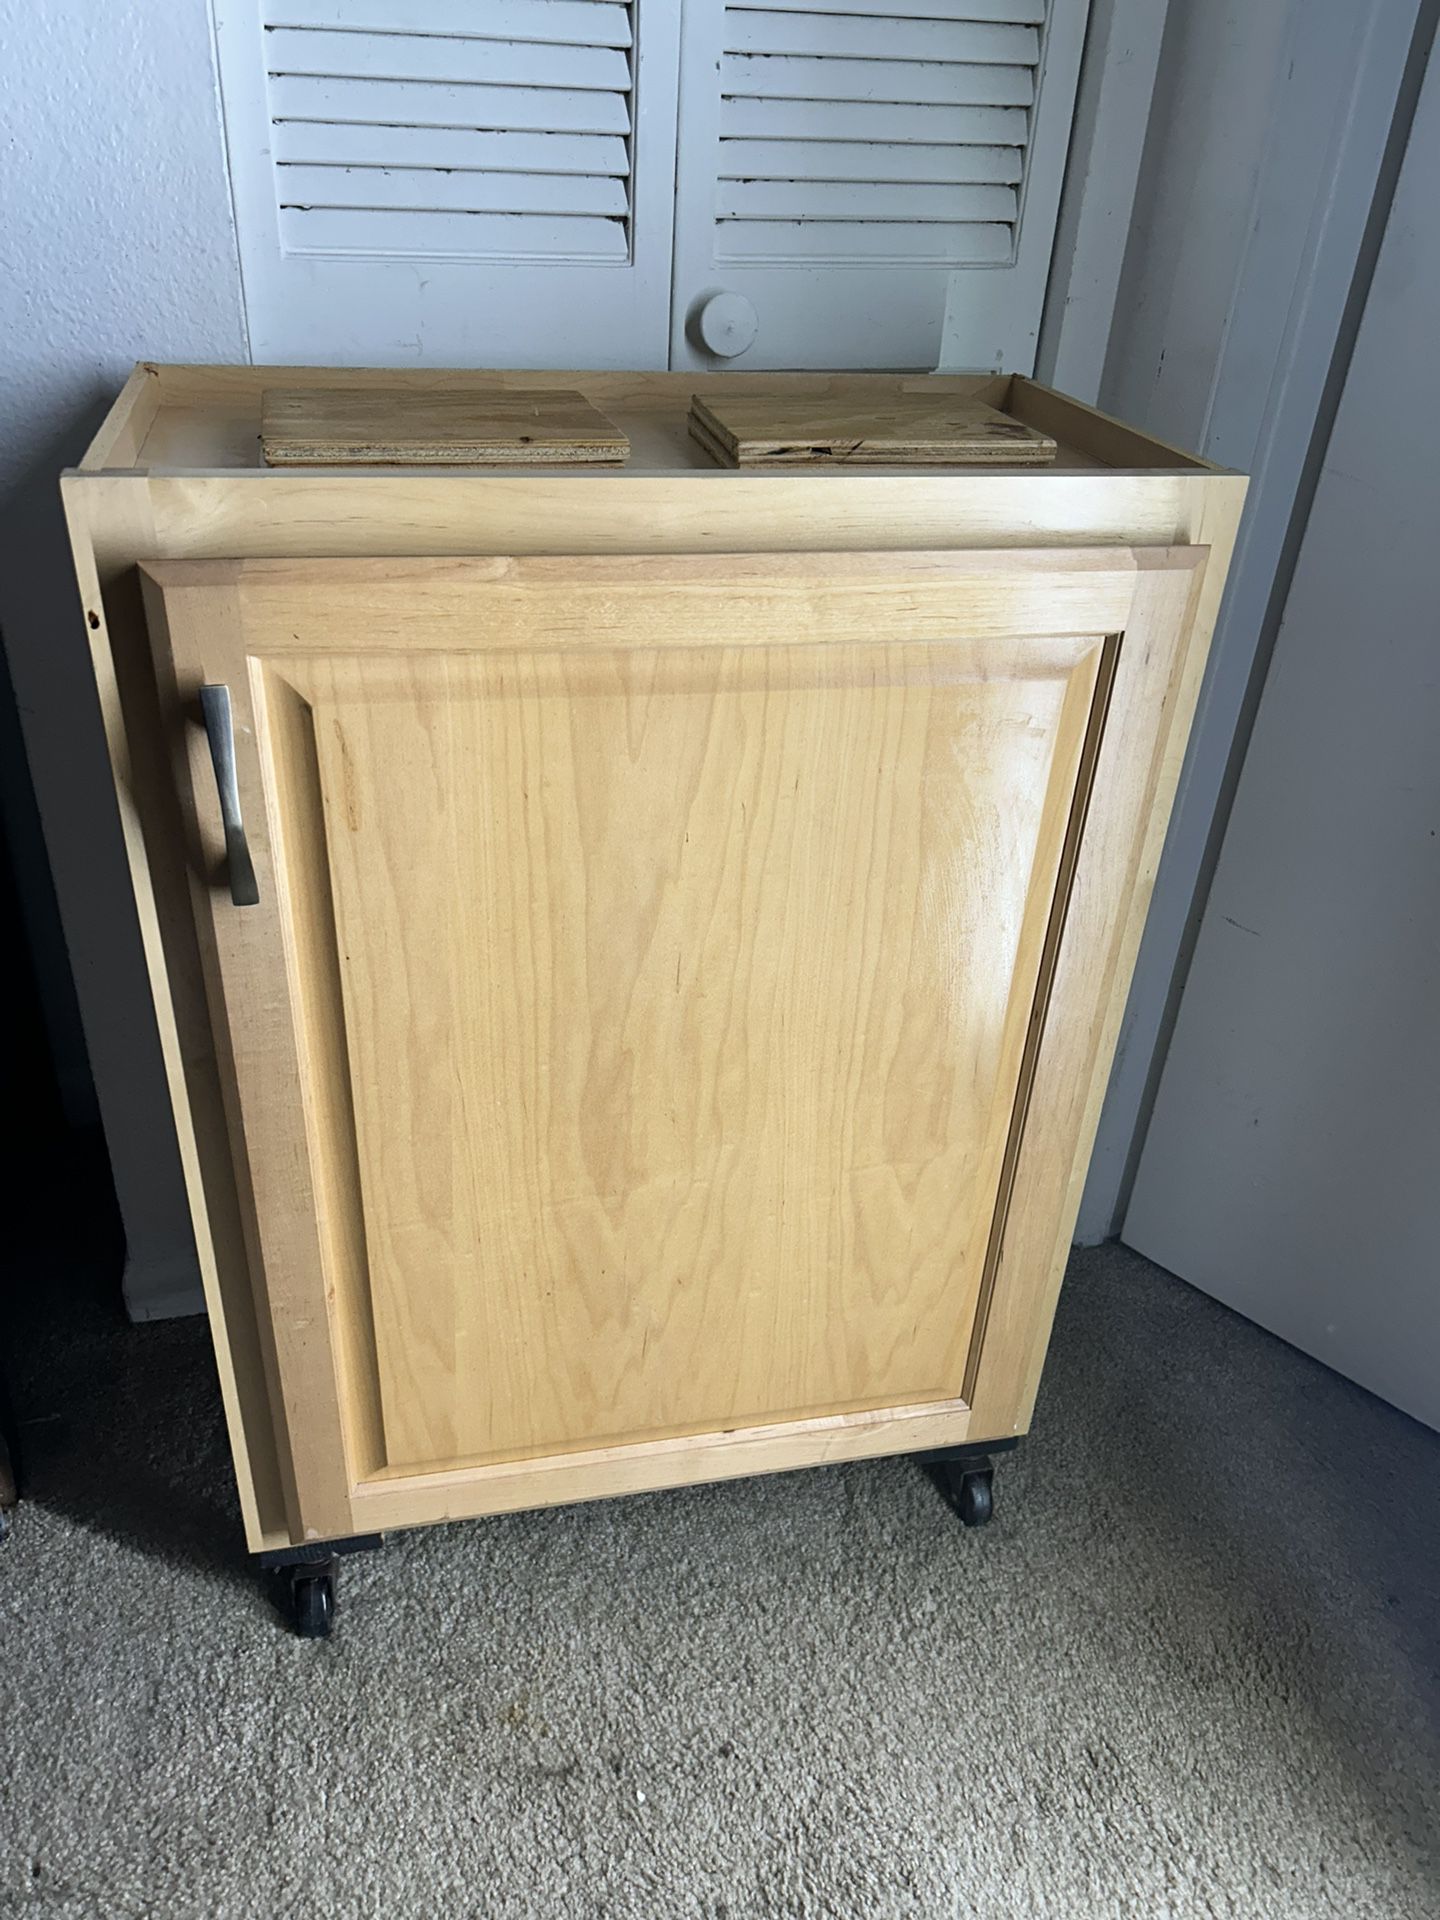 Cabinet With Wheels 